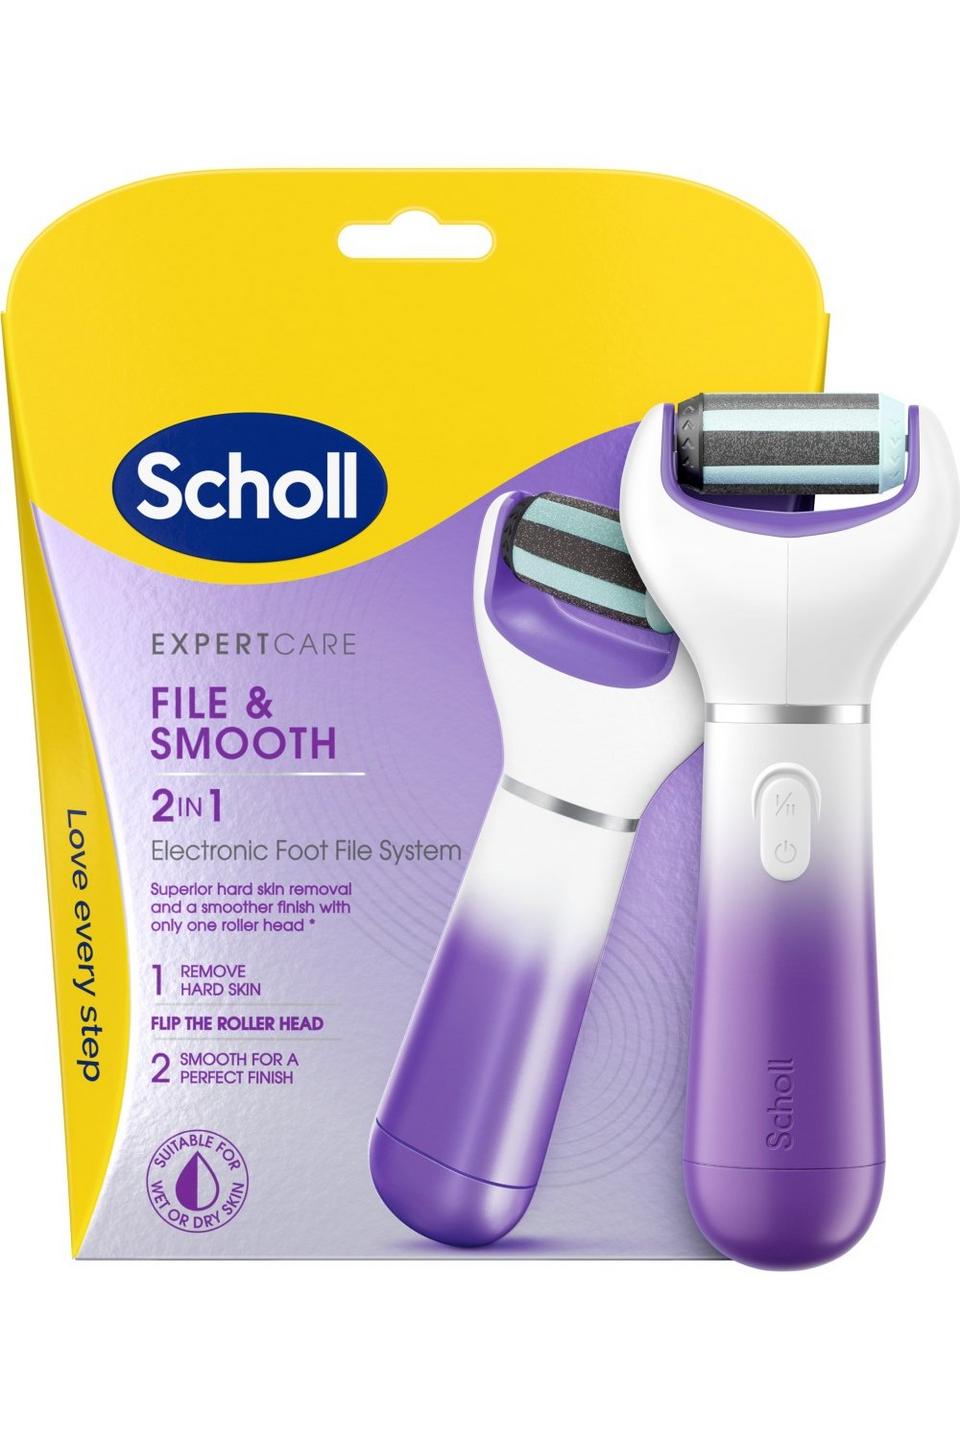 Medication & Remedies | Smooth 2in1 Smooth Electric Foot File Pedi | Scholl